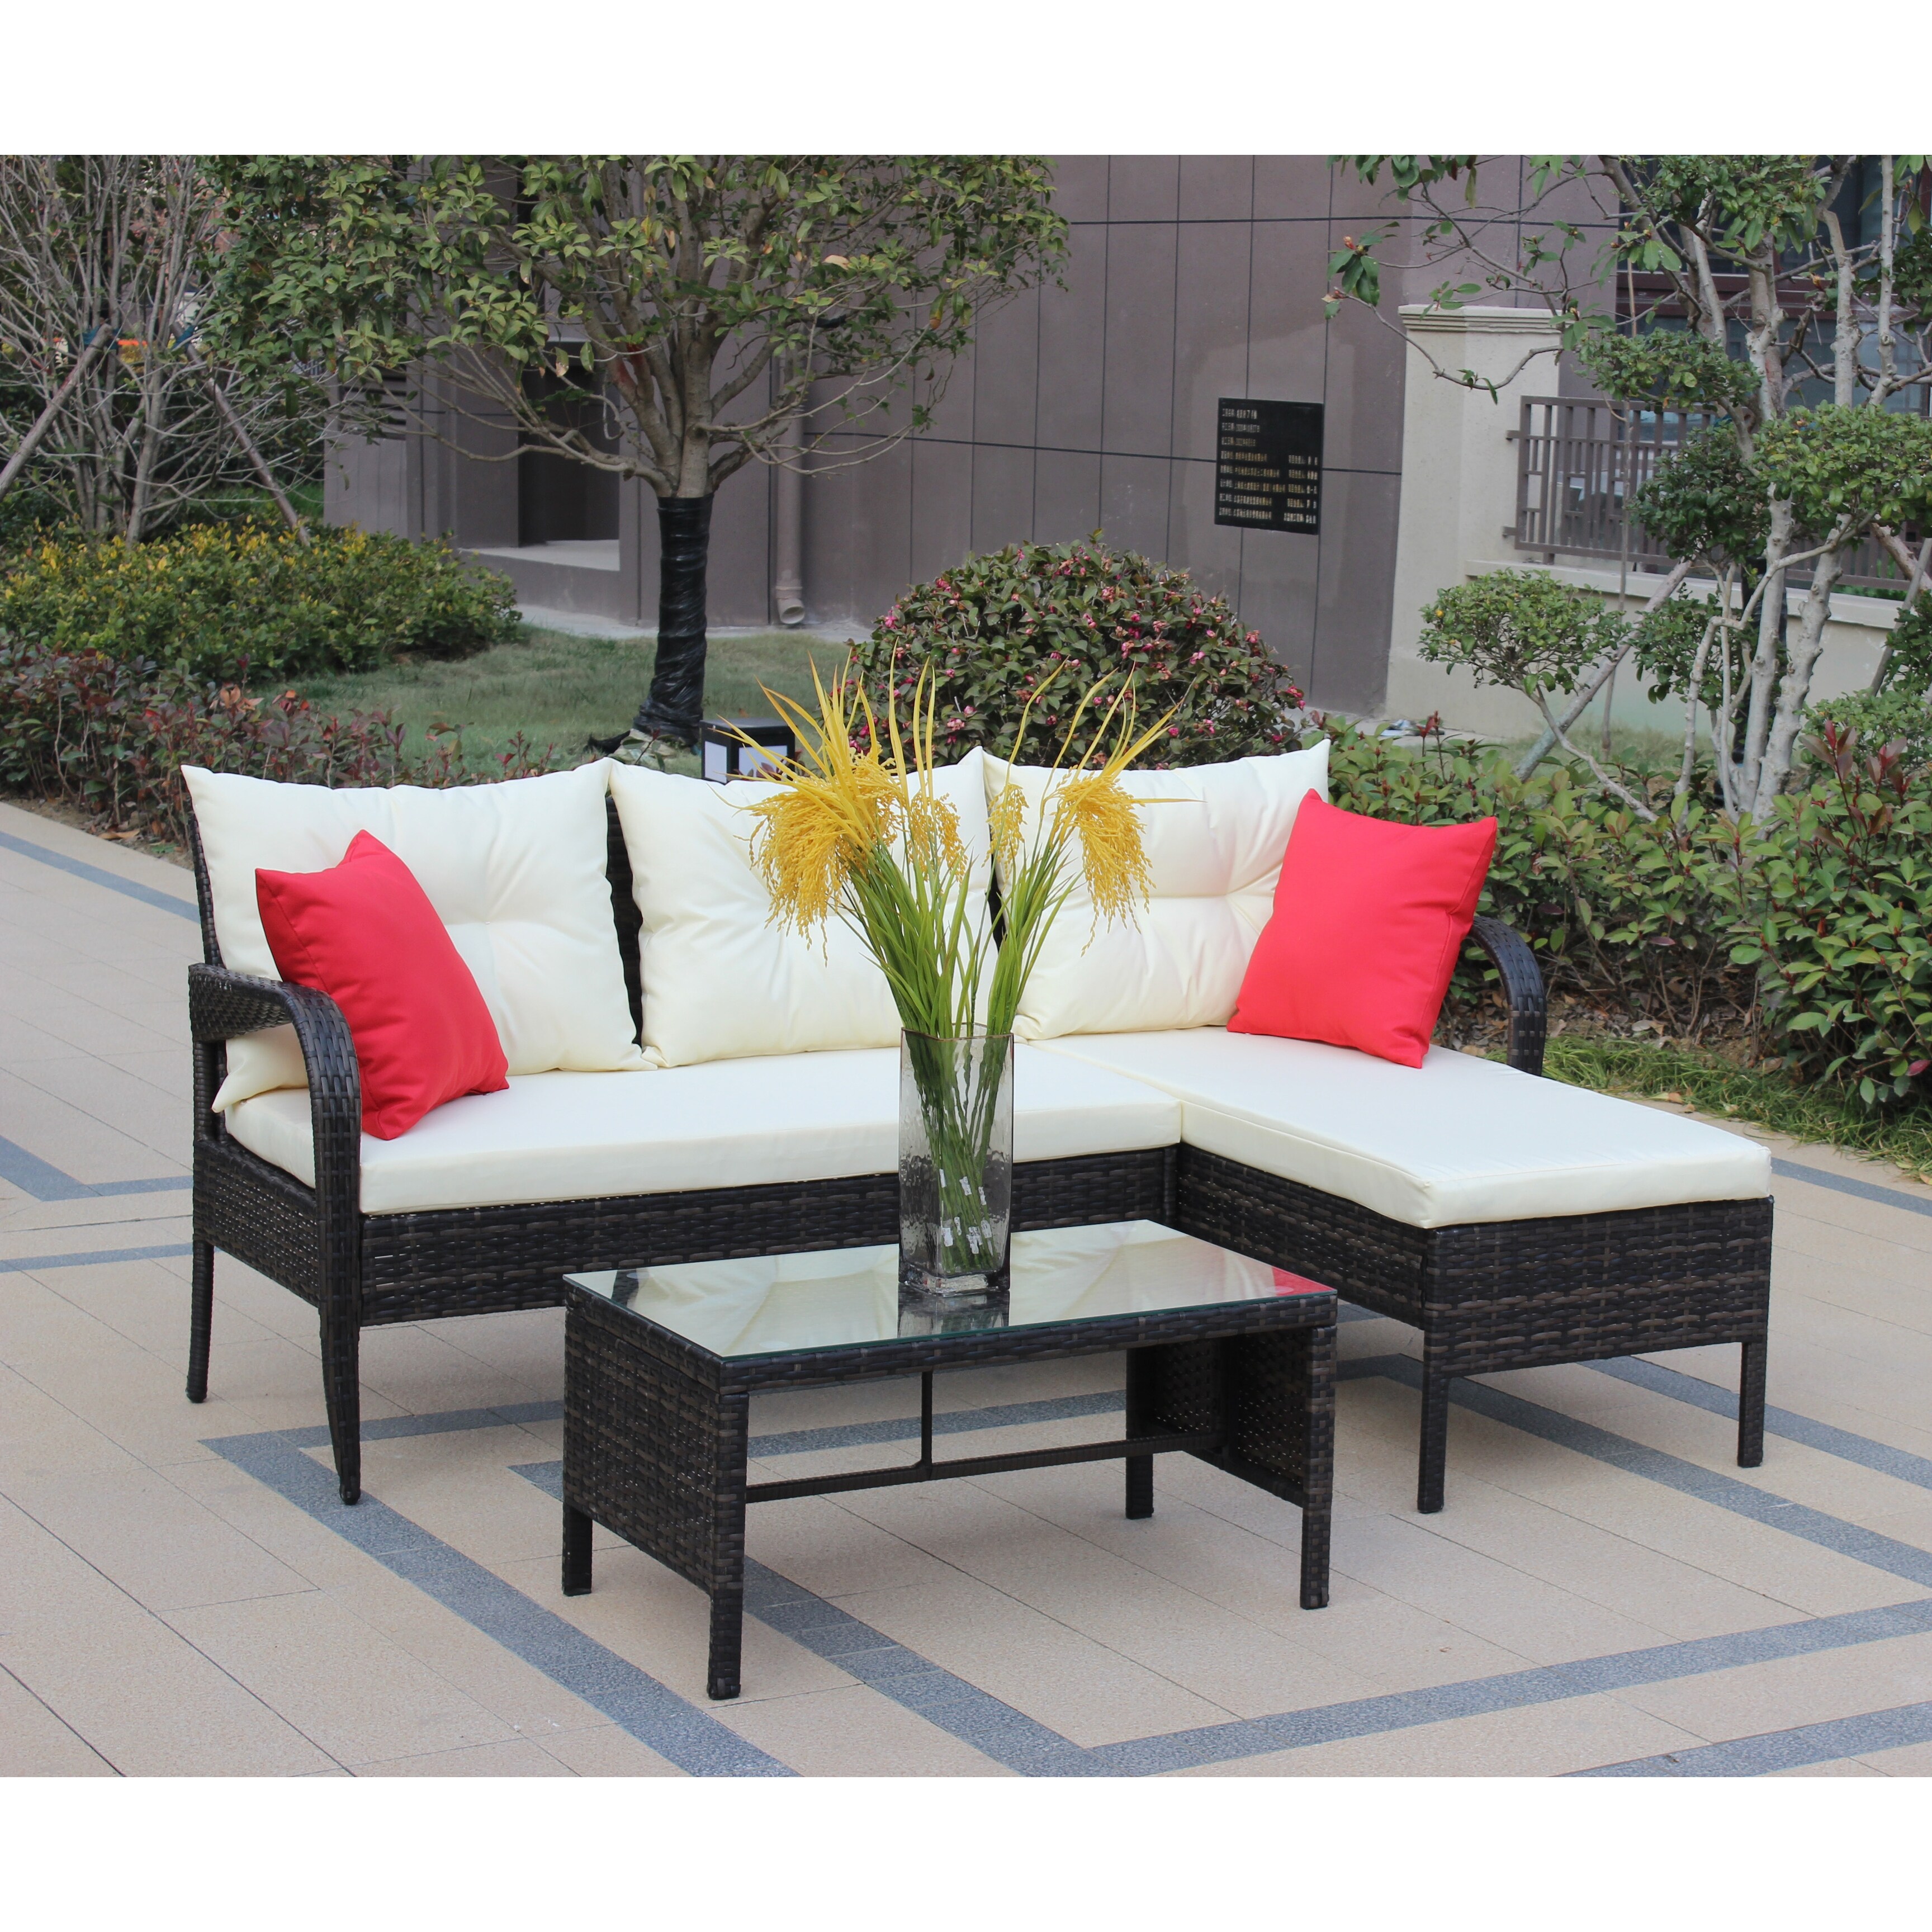 3-pieces Outdoor Patio Furniture Sets For 3-4  Wicker Rattan Sectional Conversation Set With 2 Seat Cushions and 3 Back Cushions